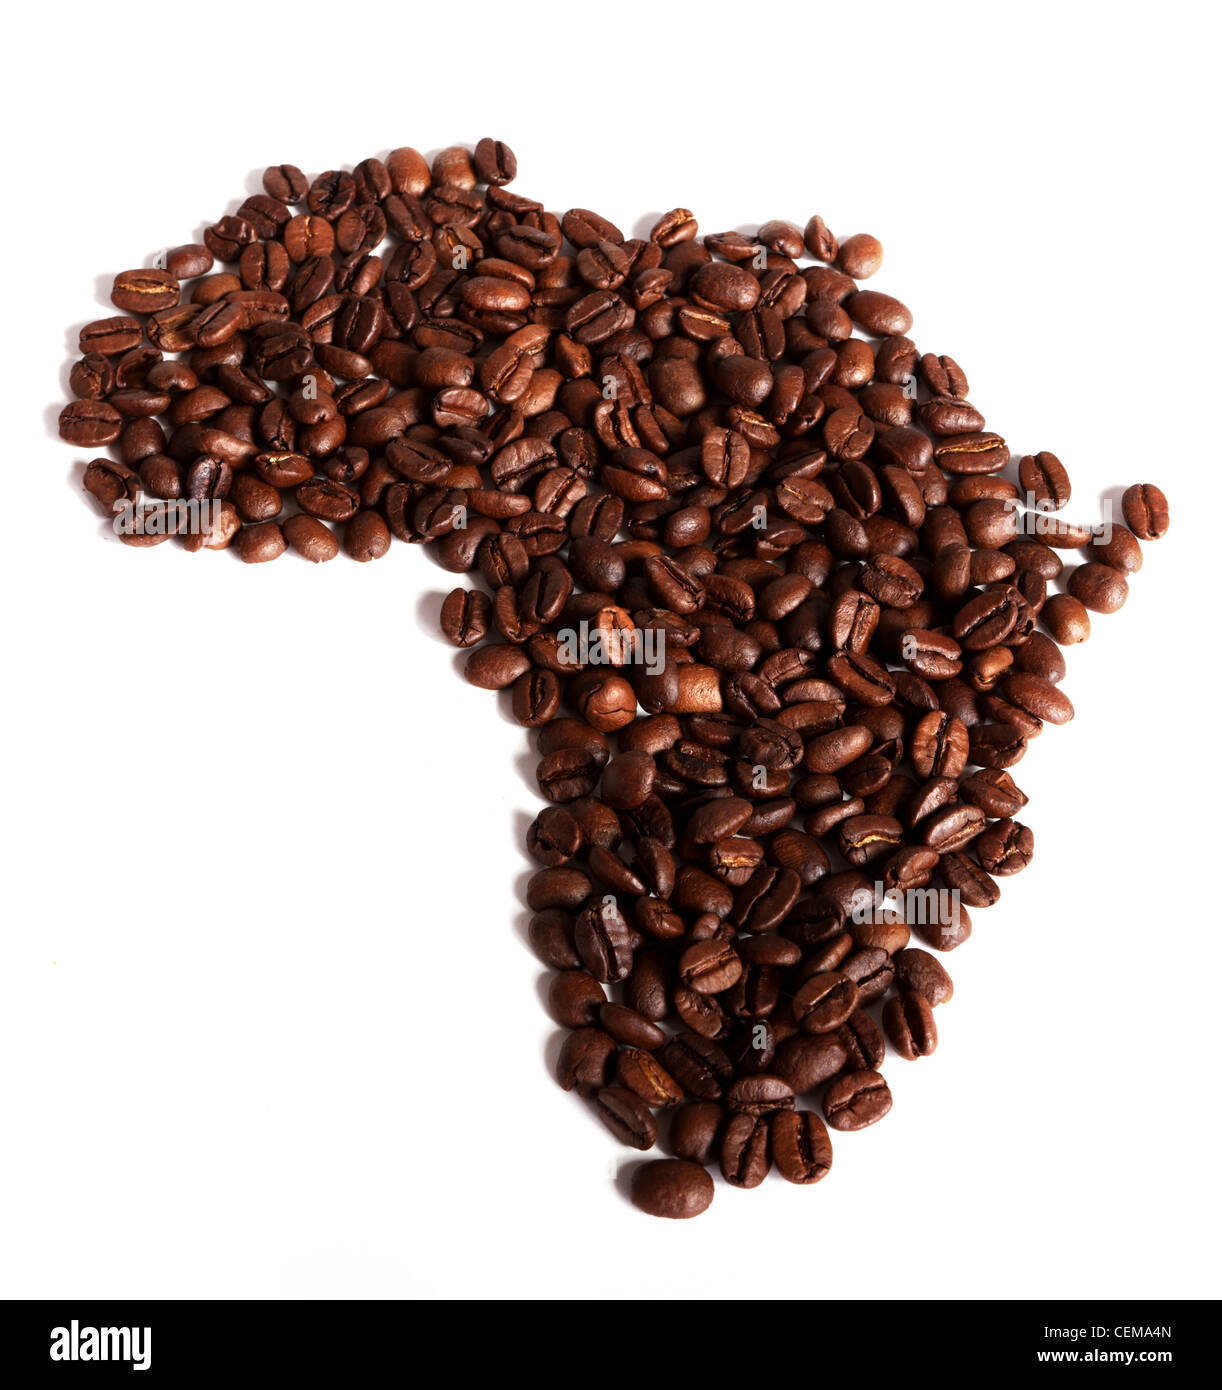 Africa a nation made of coffee Stock Photo